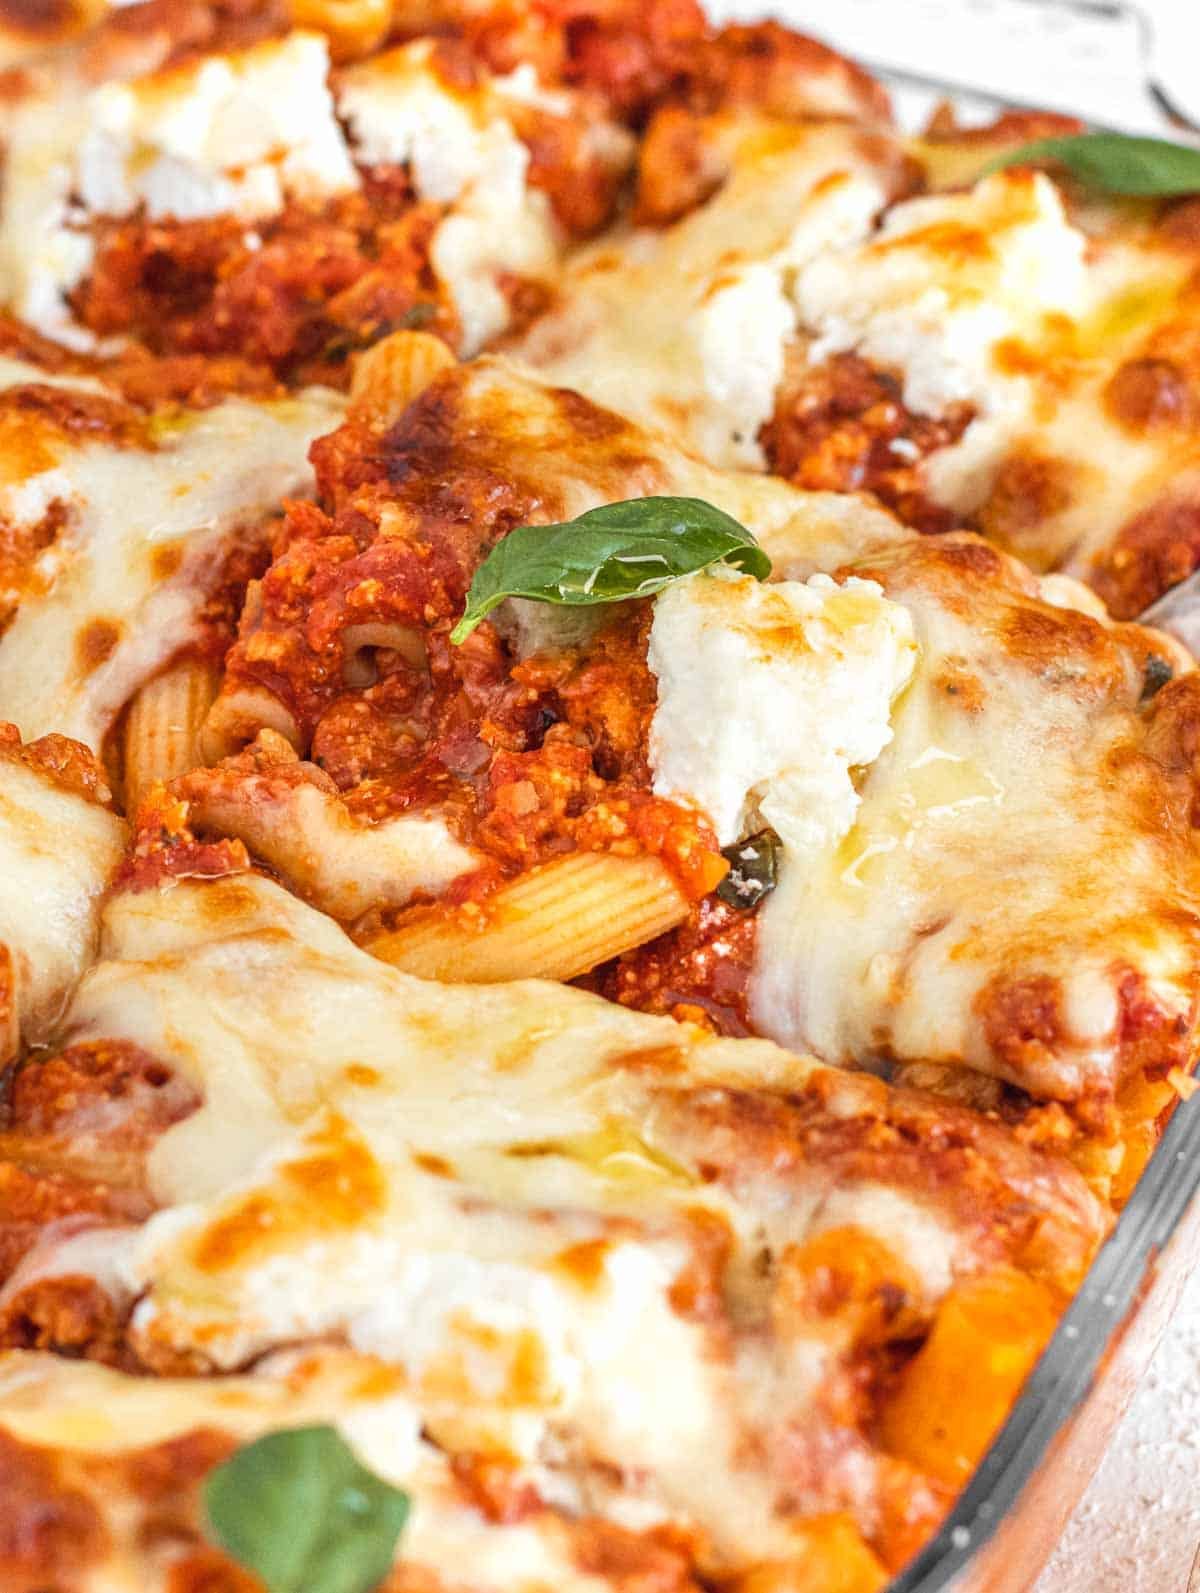 Baked ziti pasta and melted cheese